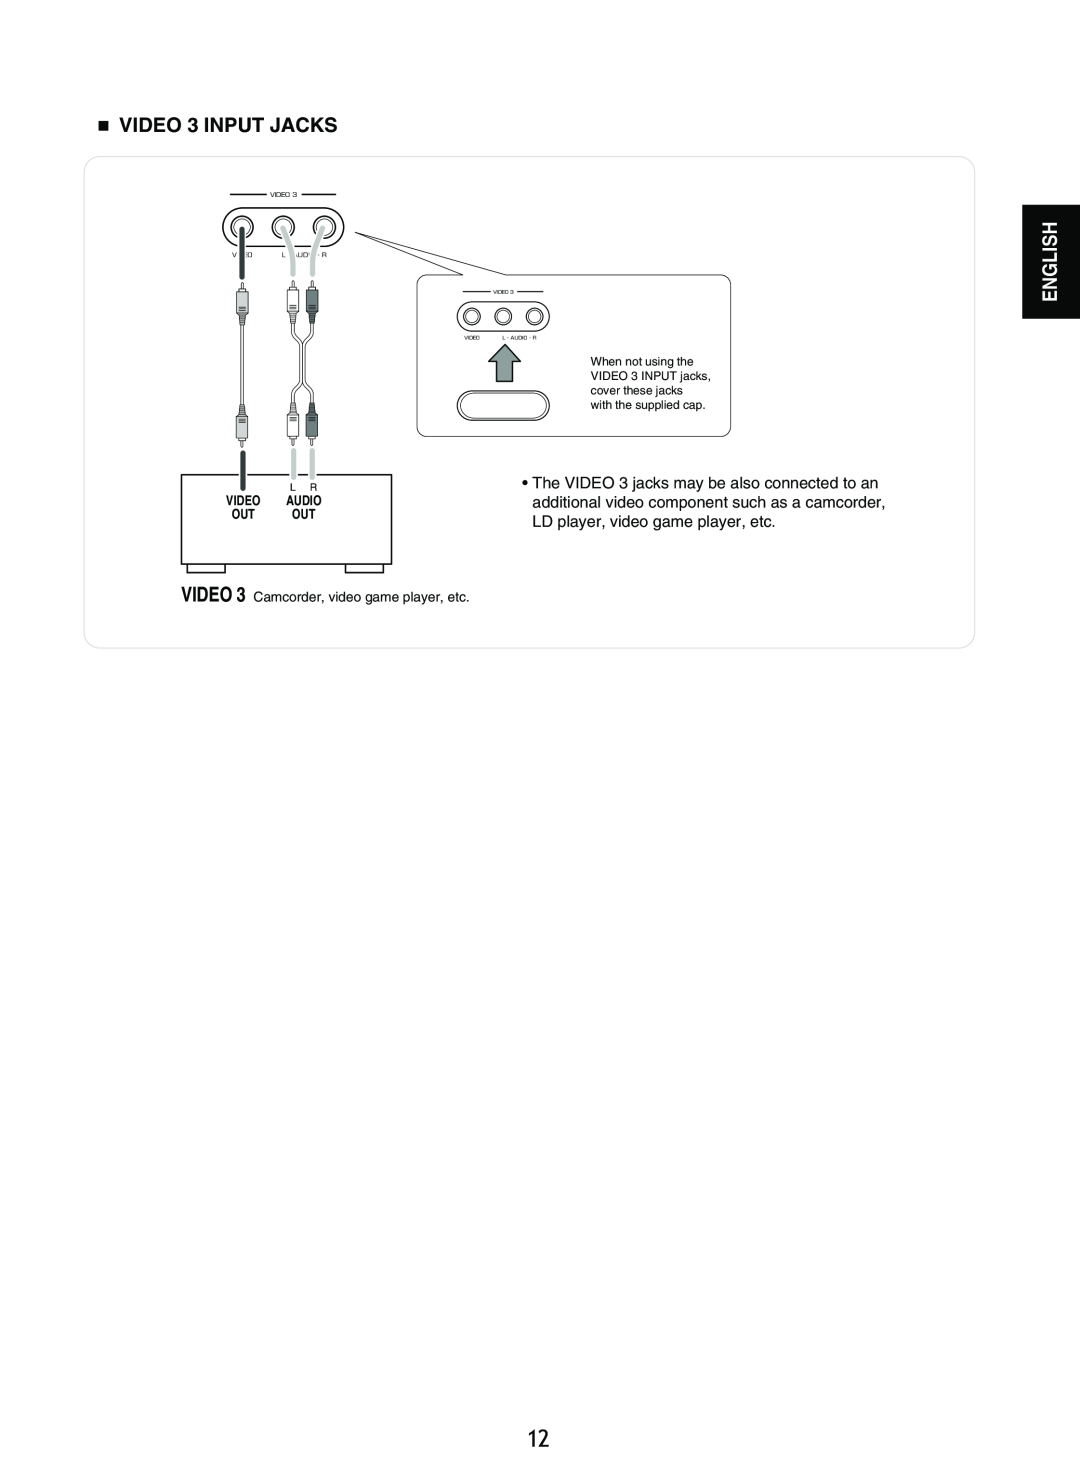 Sherwood RD-8601 operating instructions VIDEO 3 INPUT JACKS, English, Video Audio Out Out, Video Video L - Audio - R 